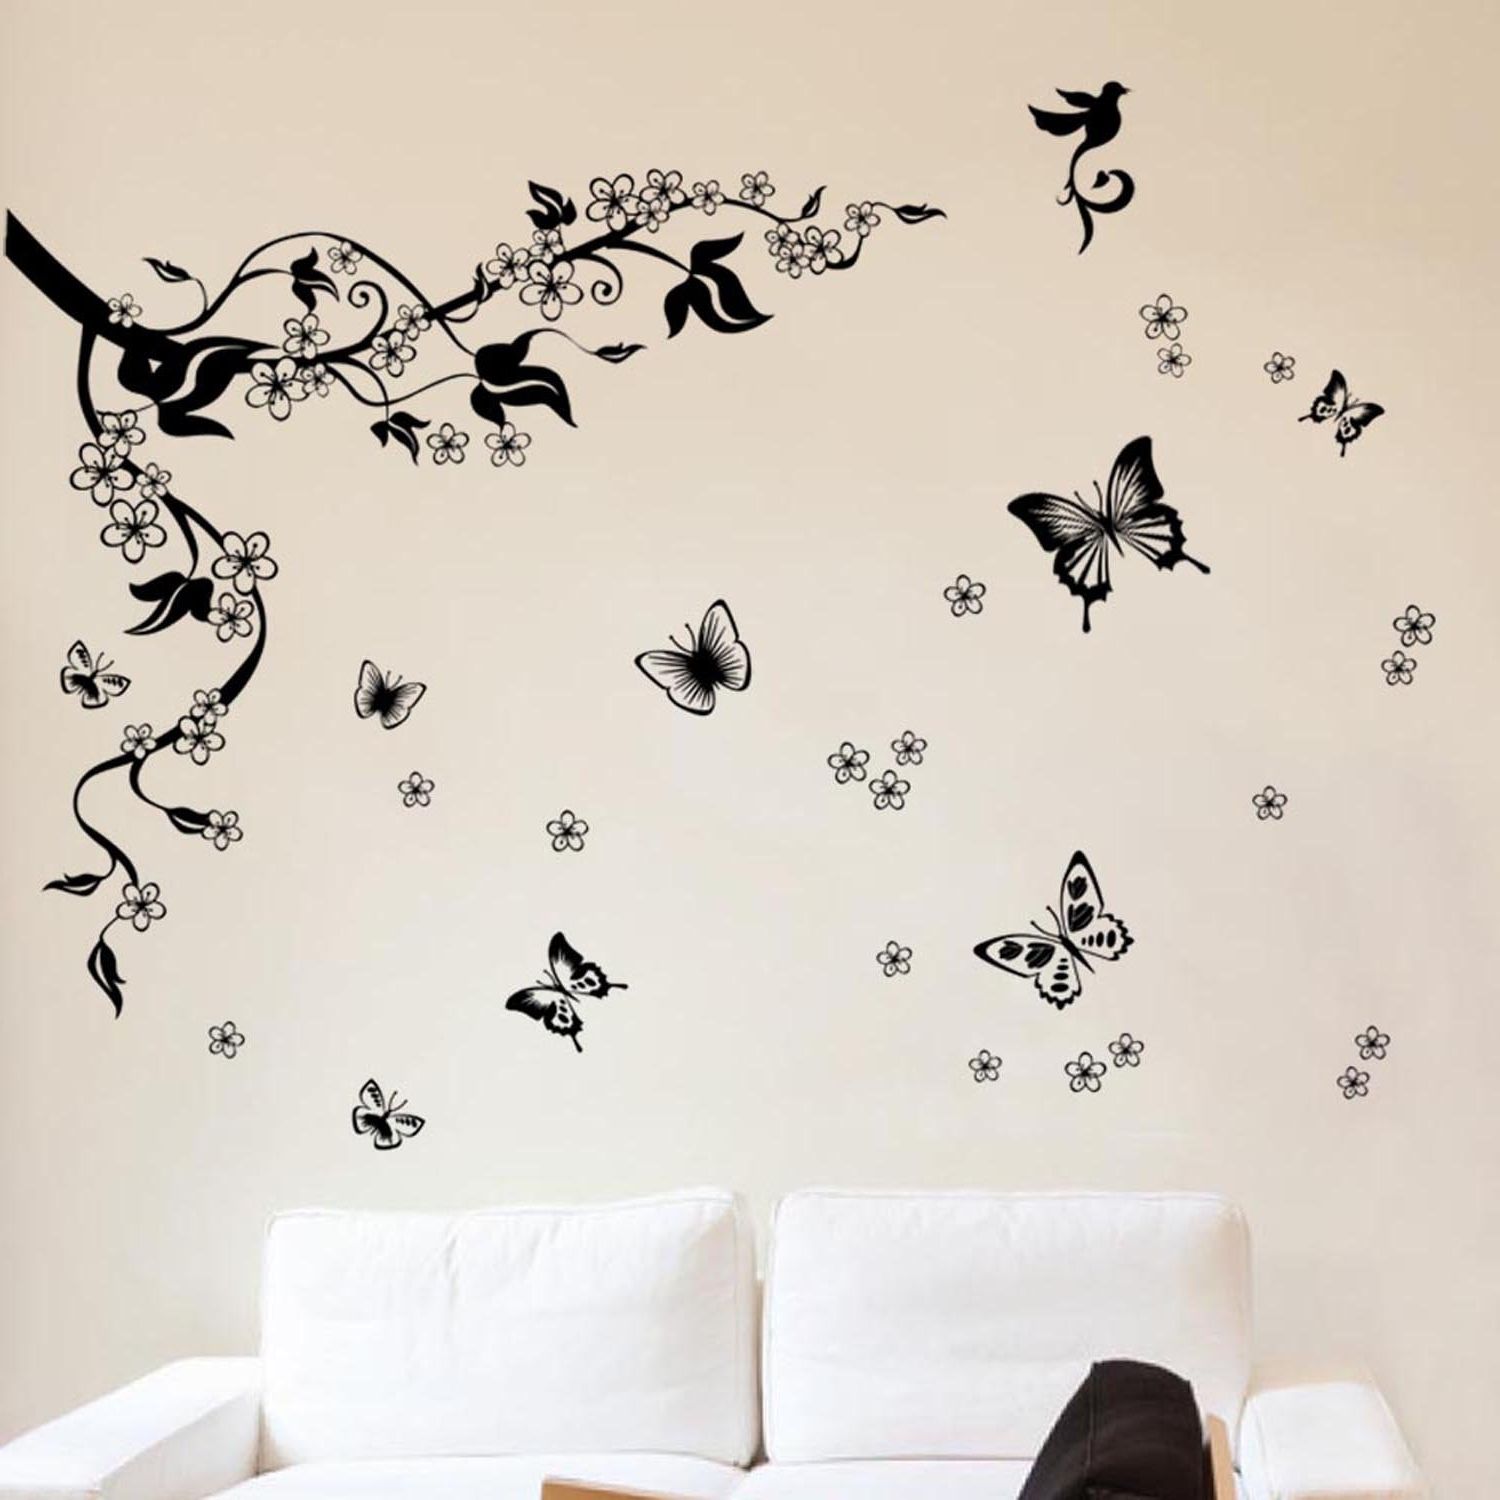 Well Known Wall Art Stickers Intended For Removable Wall Art Stickers: Amazon.co.uk (Photo 12 of 15)